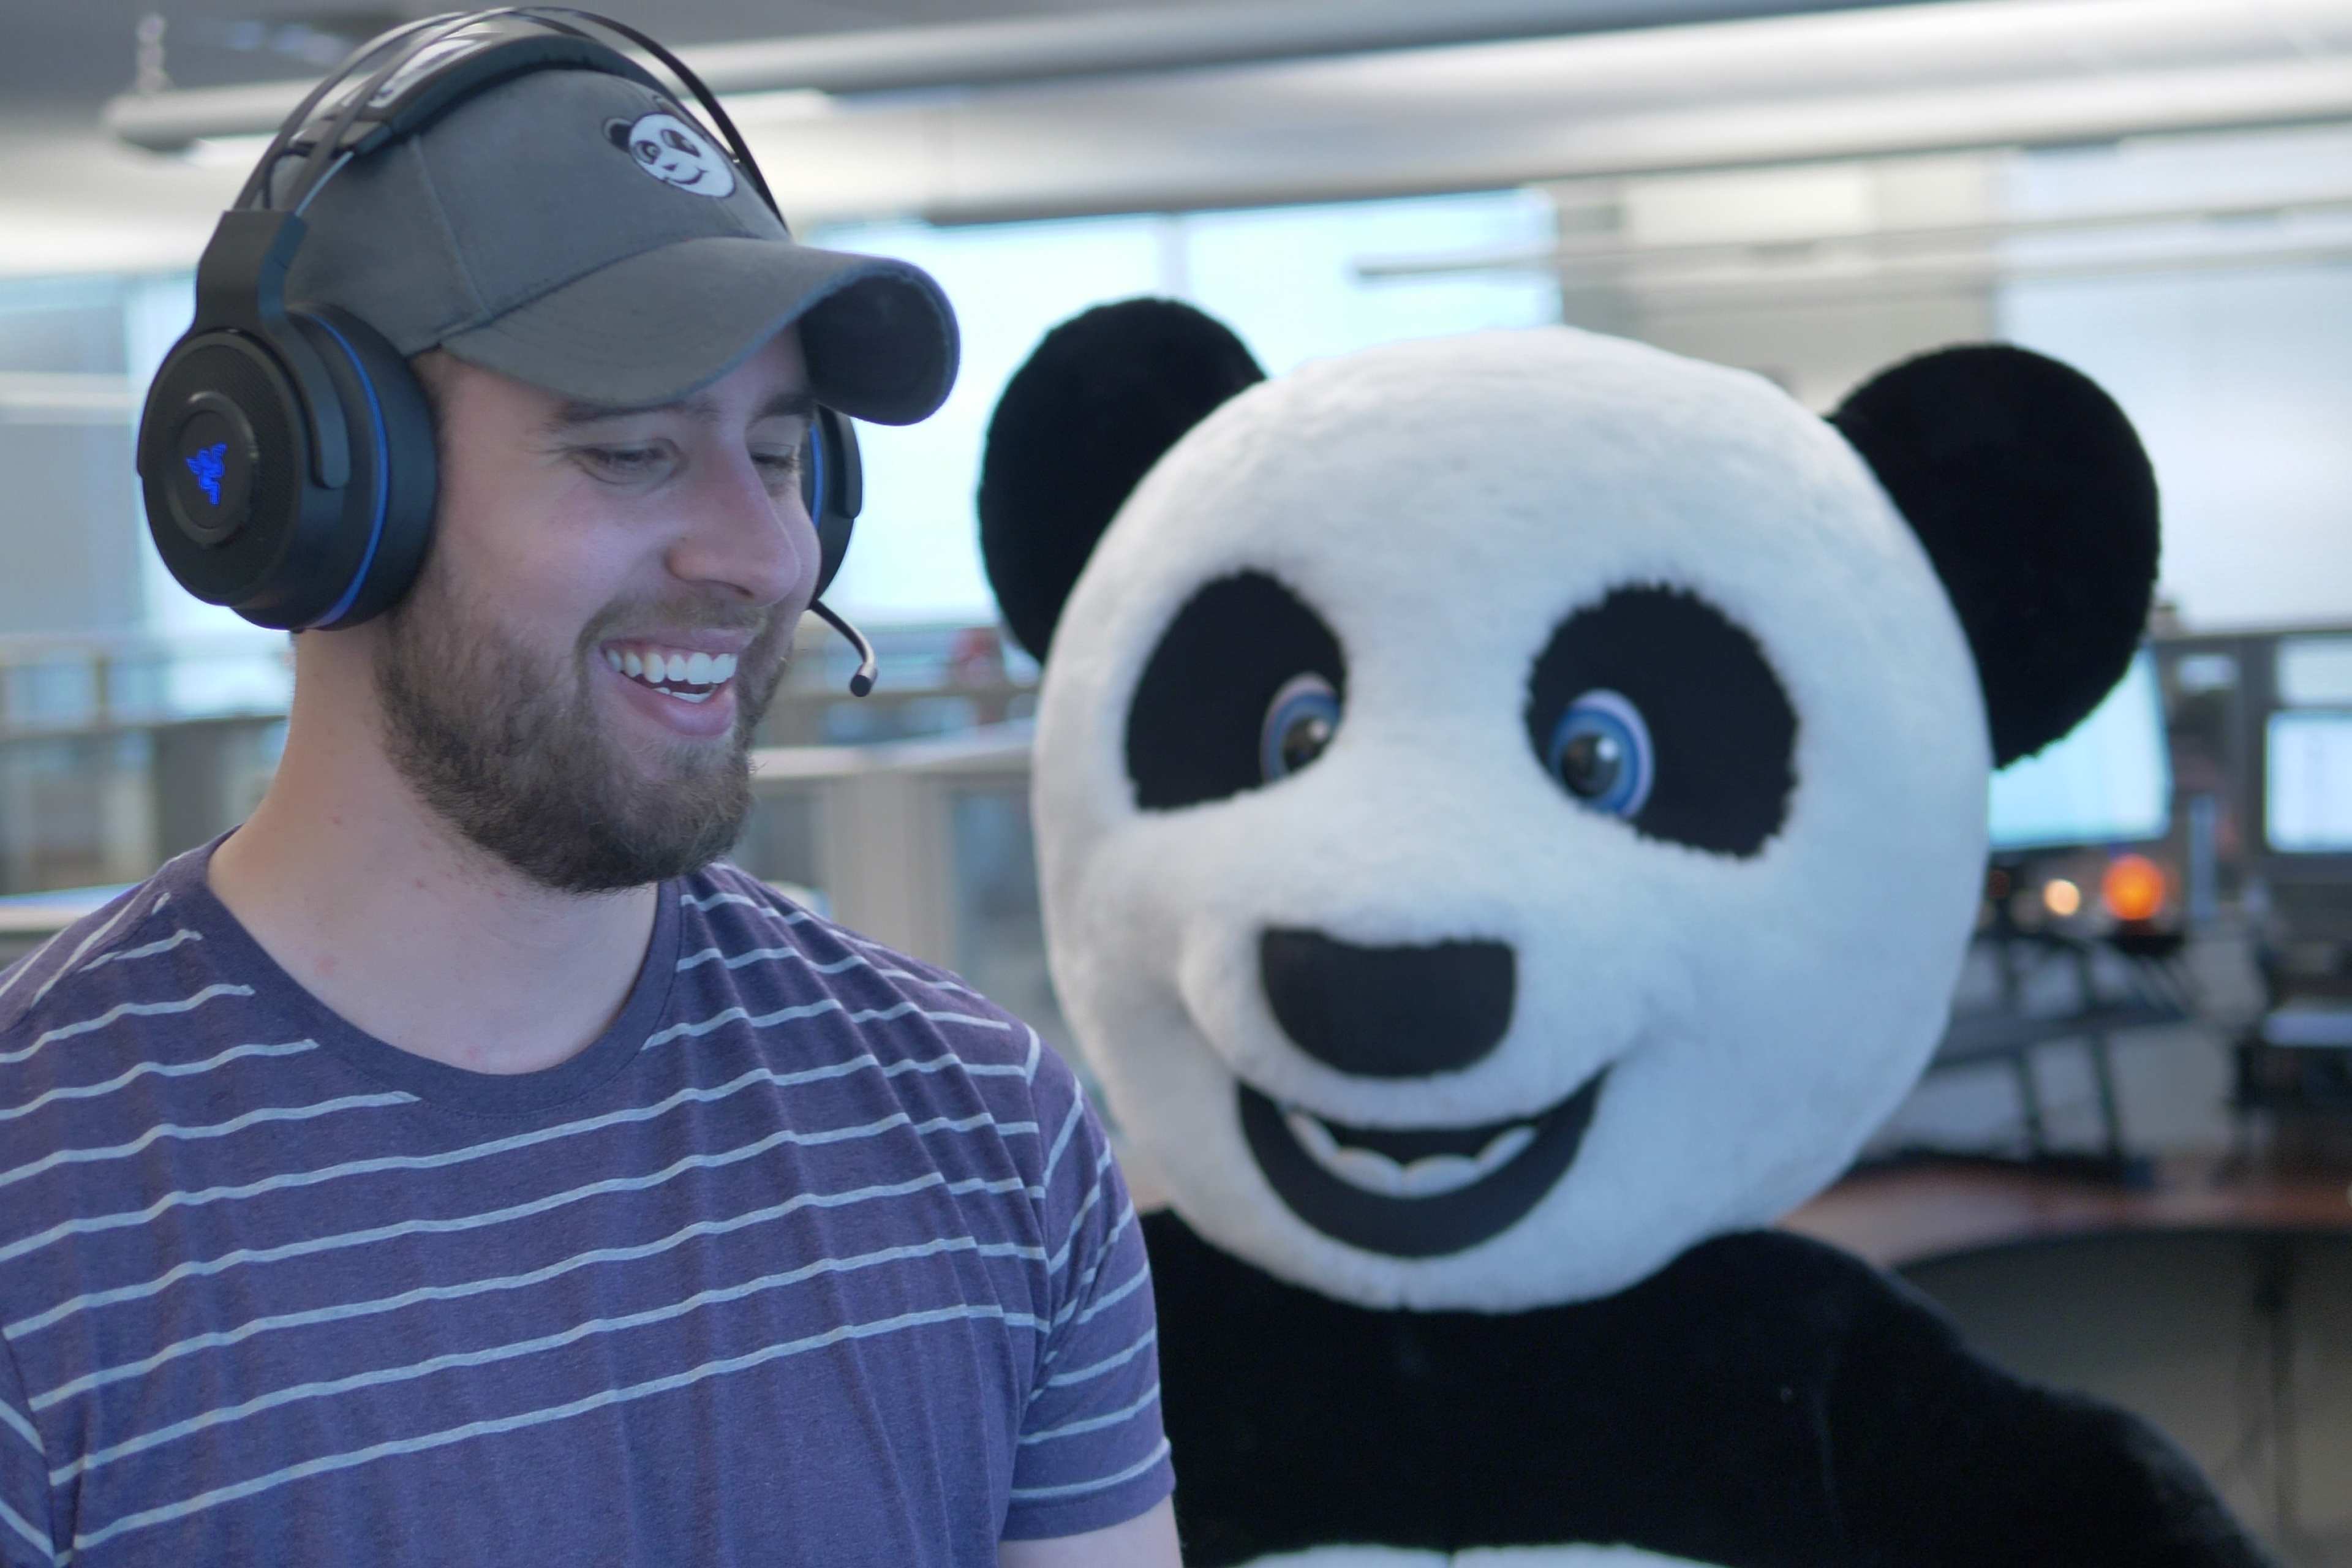 An Asset Panda employee wearing a headset is accompanied by a person in a panda costume.